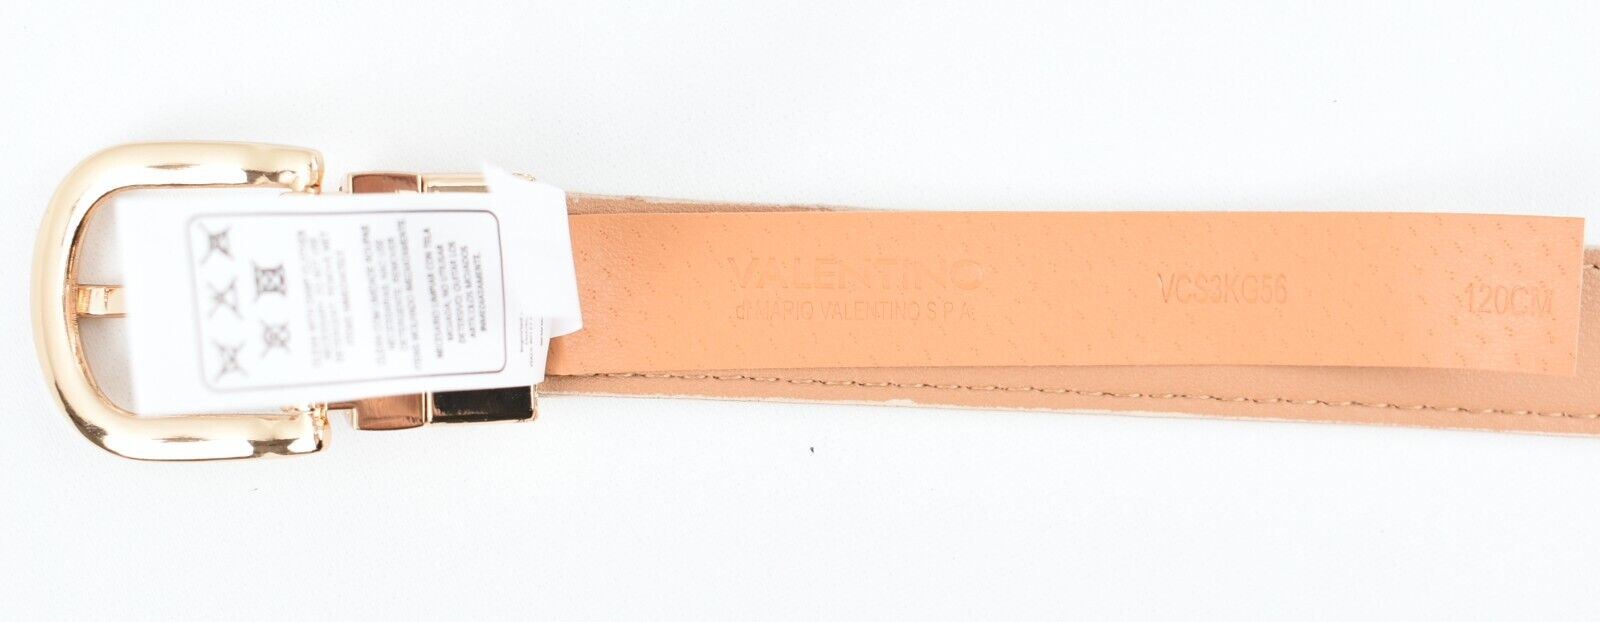 VALENTINO by MARIO VALENTINO Womens Reversible Belt, Nude/Brown, size L to XL